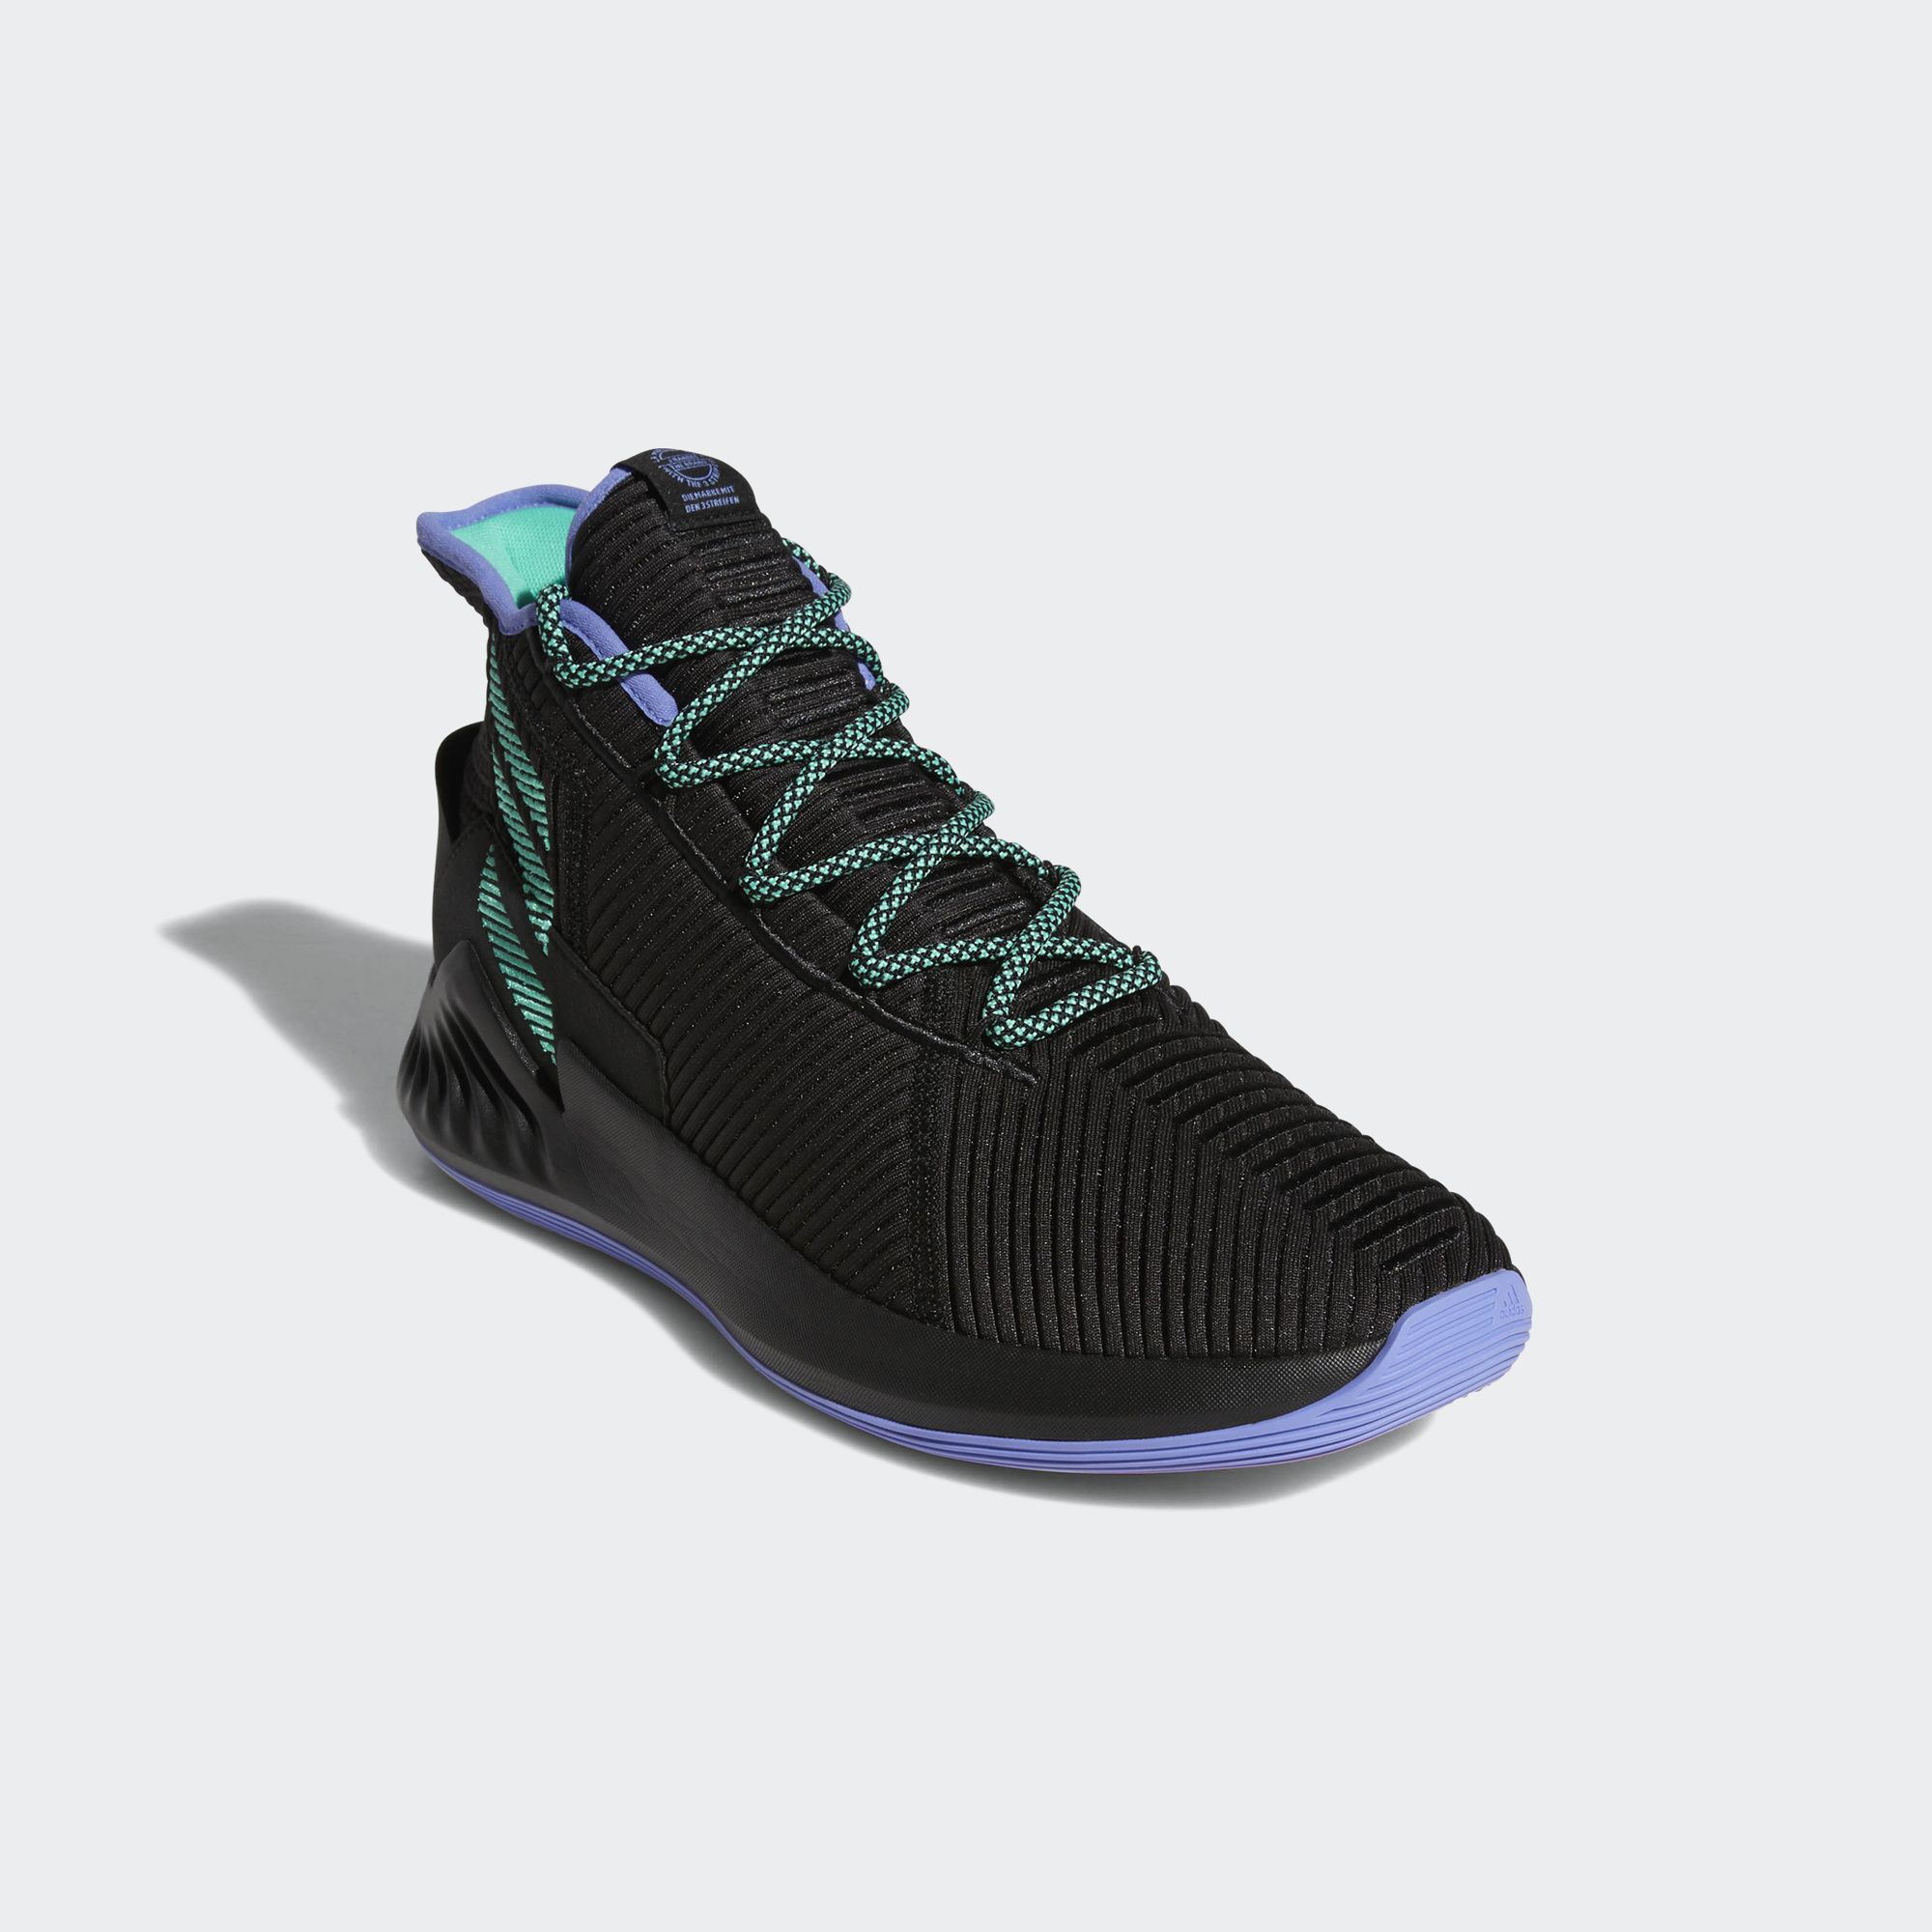 adidas d rose 9 black green - WearTesters